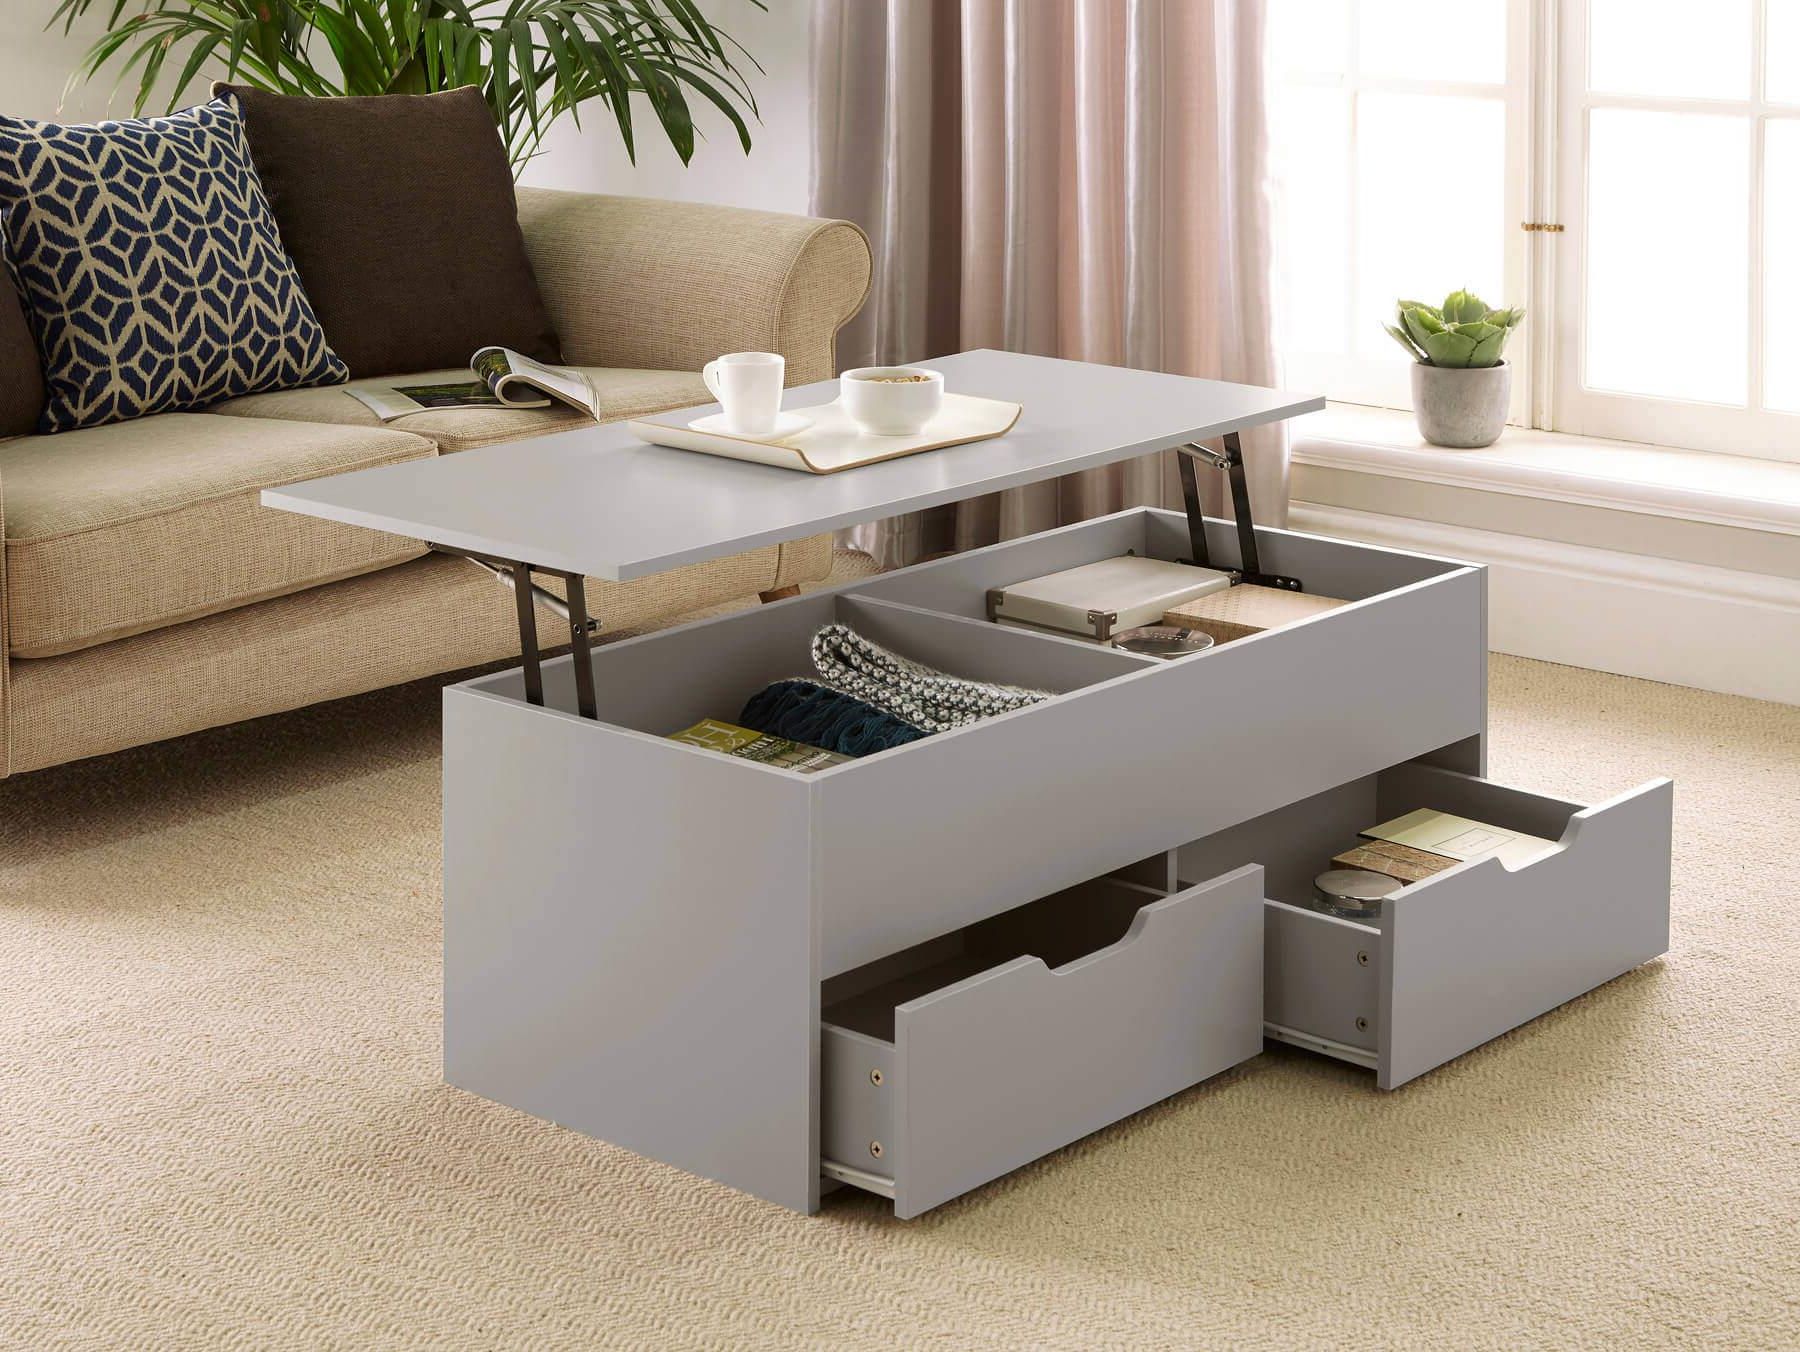 Grey Wooden Coffee Table With Lift Up Top And 2 Large With Regard To Newest Smoke Gray Wood Coffee Tables (View 6 of 20)